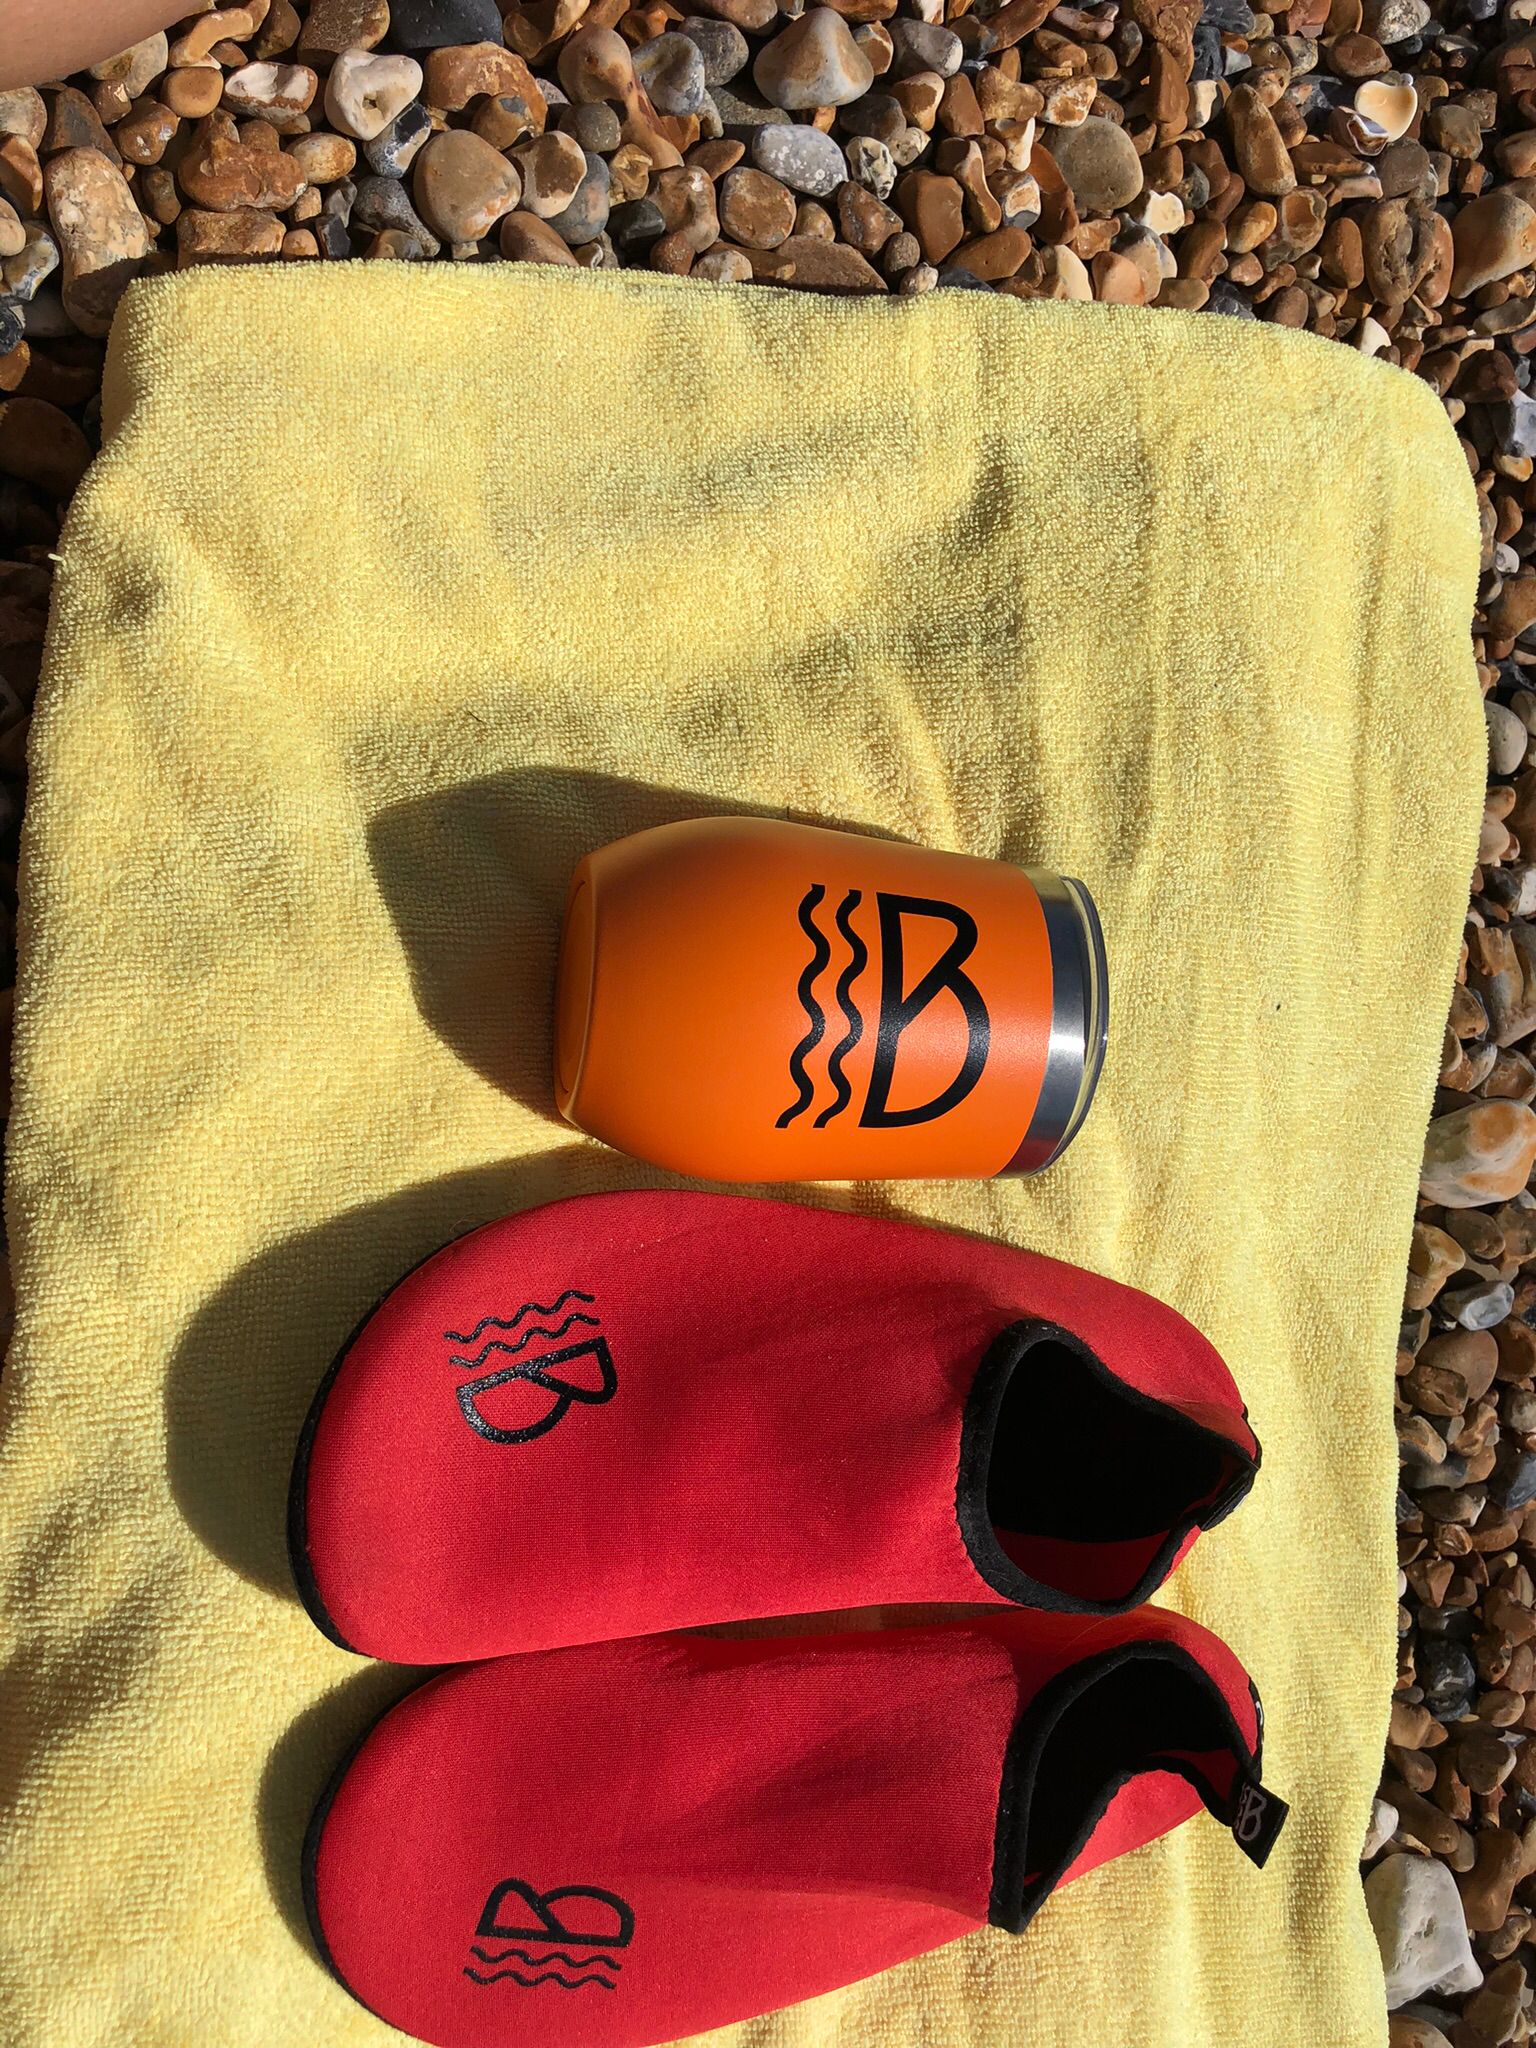 Lifeguard Red Water Shoes